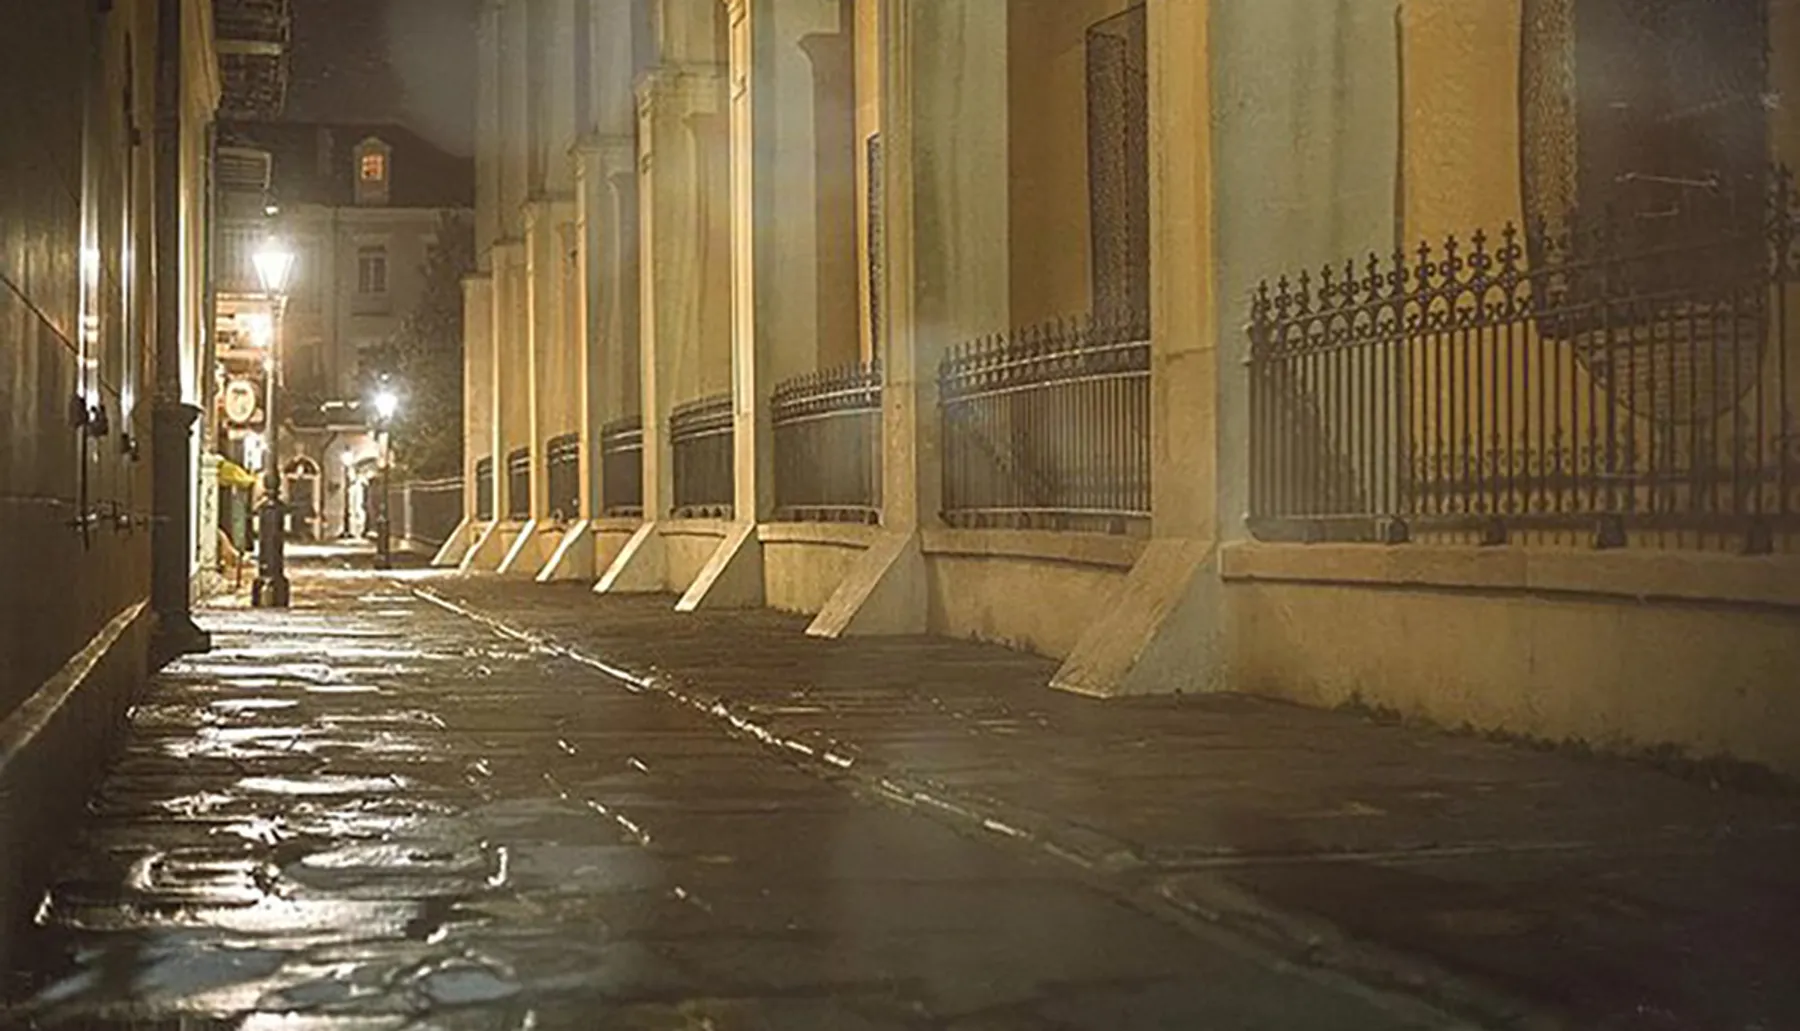 A dimly lit, wet cobblestone street flanked by stately buildings and wrought iron fences conveys a serene, mysterious atmosphere at night.